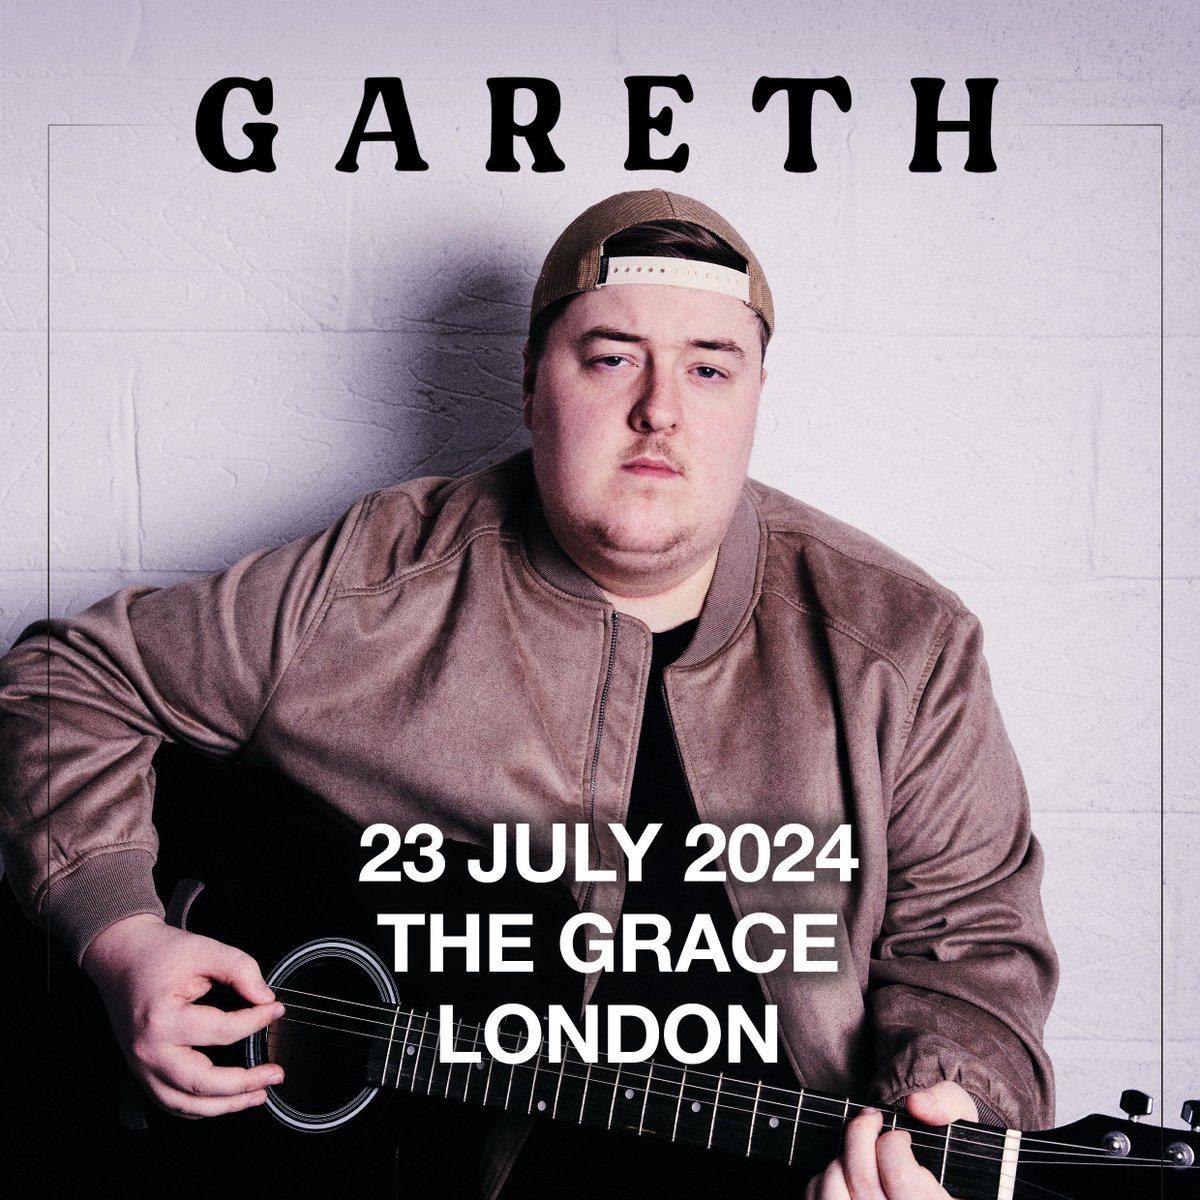 It's time... tickets are now on sale for @garethmusic1 this July! 📅 Tuesday 23 July 2024 🎟️ Get yours here 👉 ticketweb.uk/event/gareth-t…